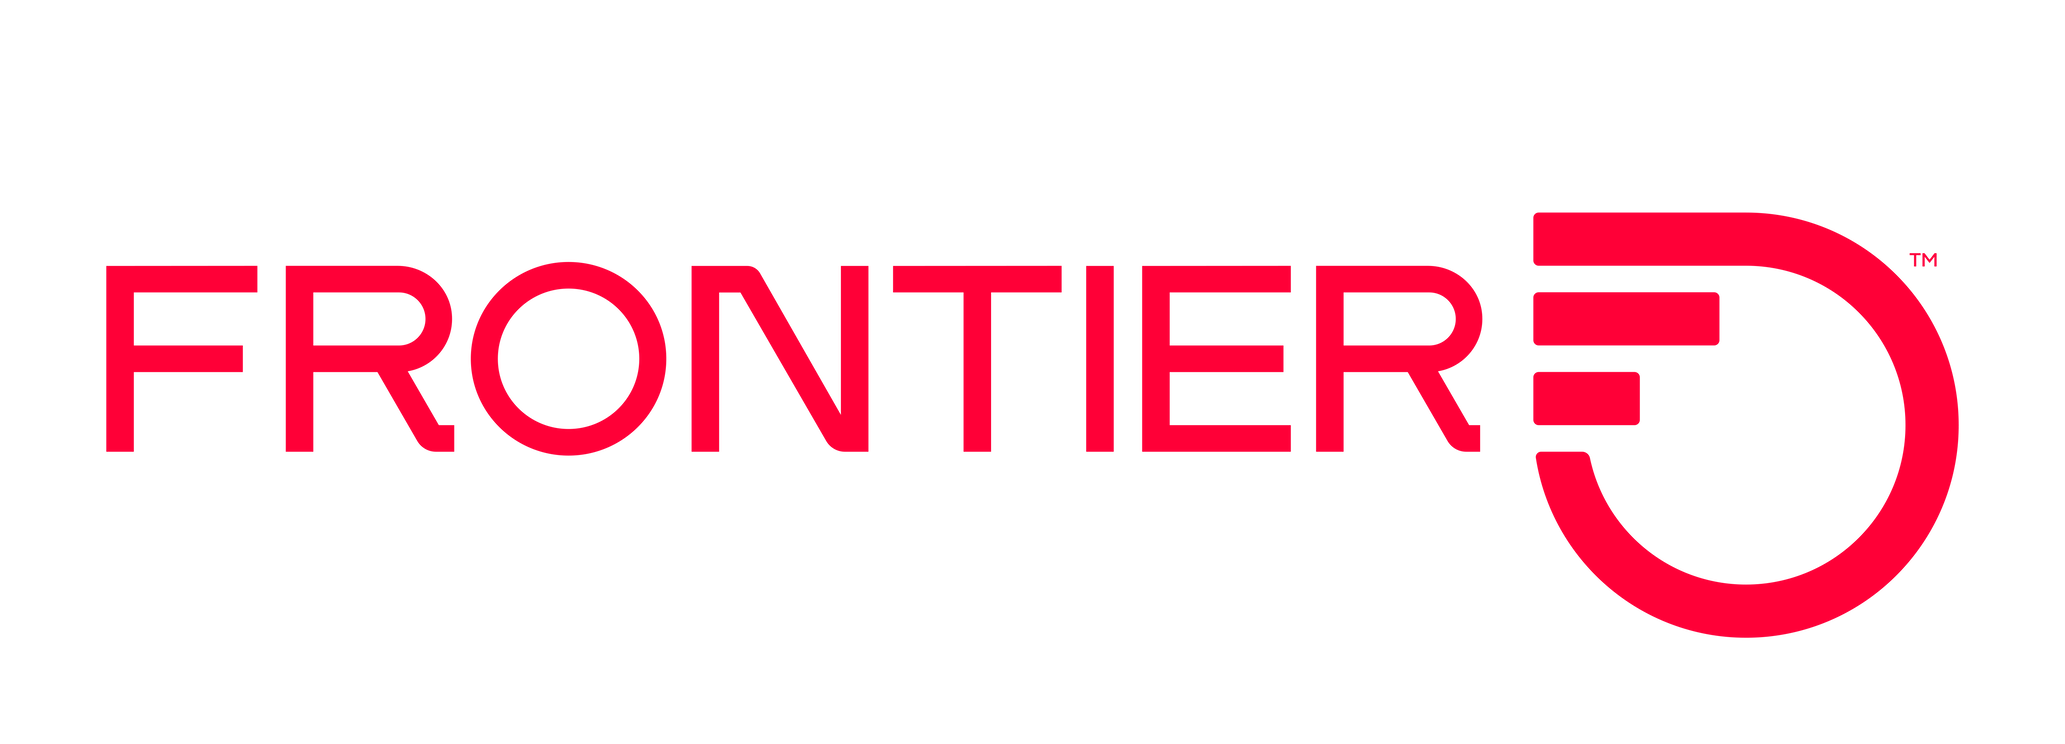 Frontier + RingCentral